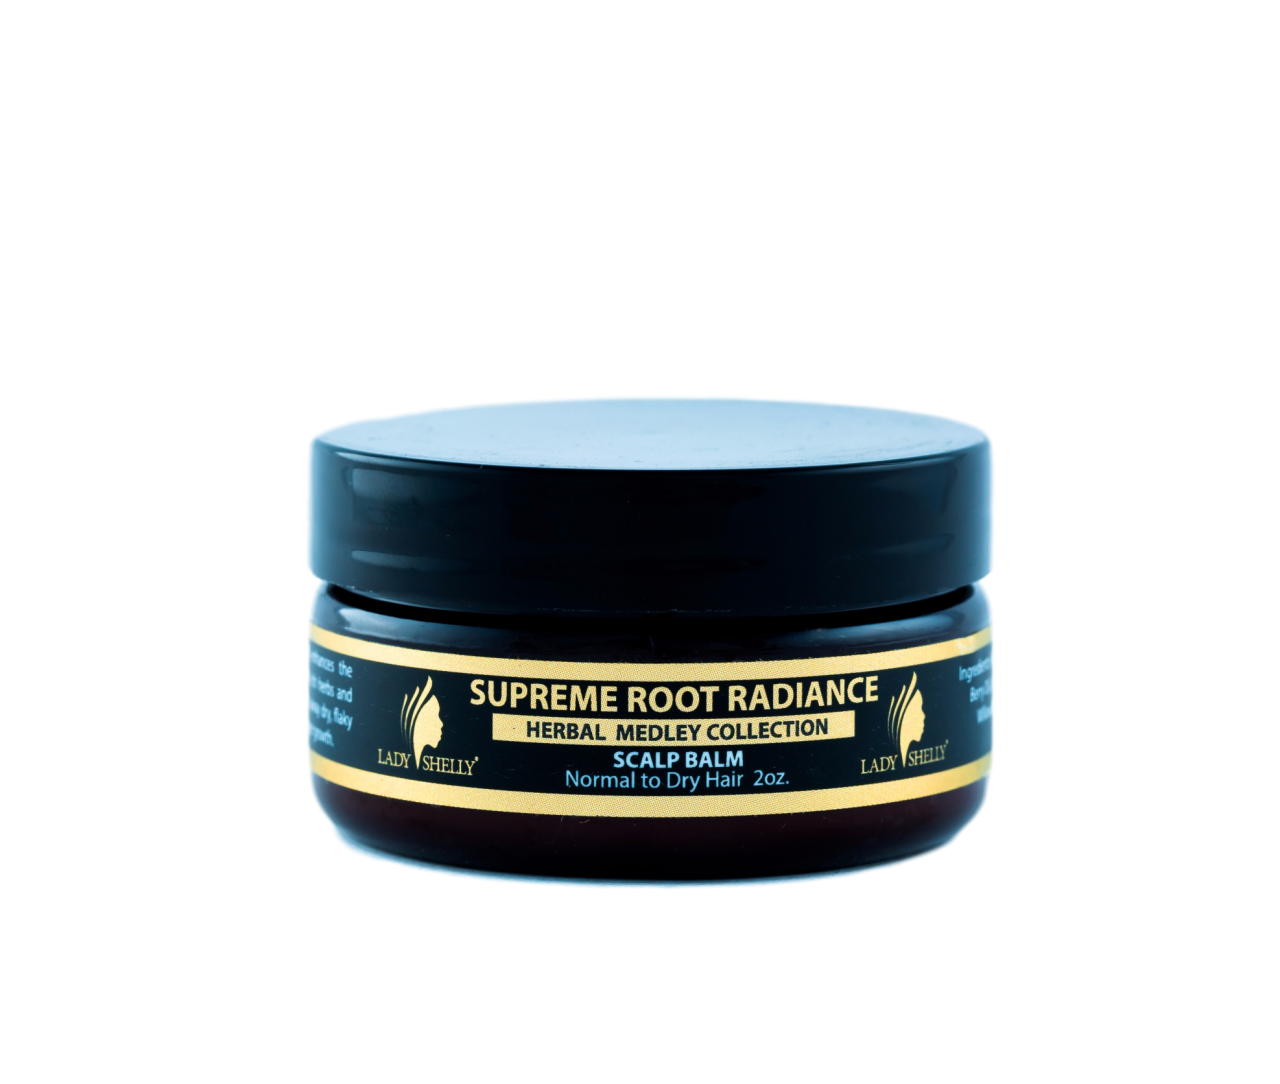 Lady Shelly Supreme Root Radiance Herbal Medley Collection Scalp Balm Normal To Dry Hair 2oz.